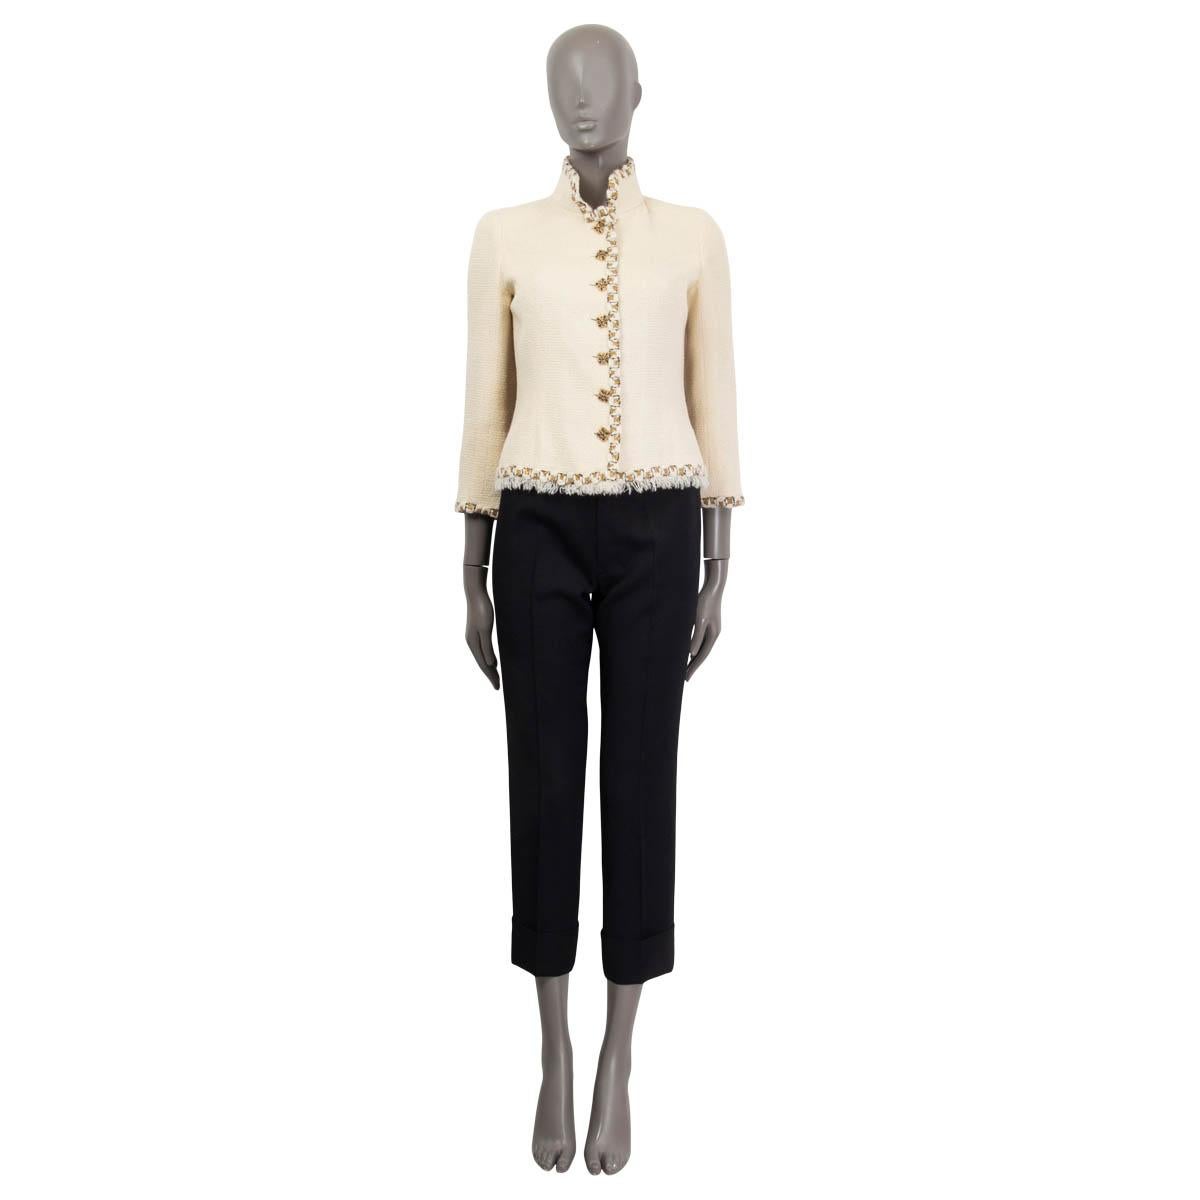 100% authentic Chanel 'Paris Byzance'  tweed blazer in ivory wool (95%) and nylon (5%). Metier's d'Art 2011 collection. Features Gripoix buttons, white fringes at the hemline and gold lurex embellishments around the collar, hemline, cuffs and the